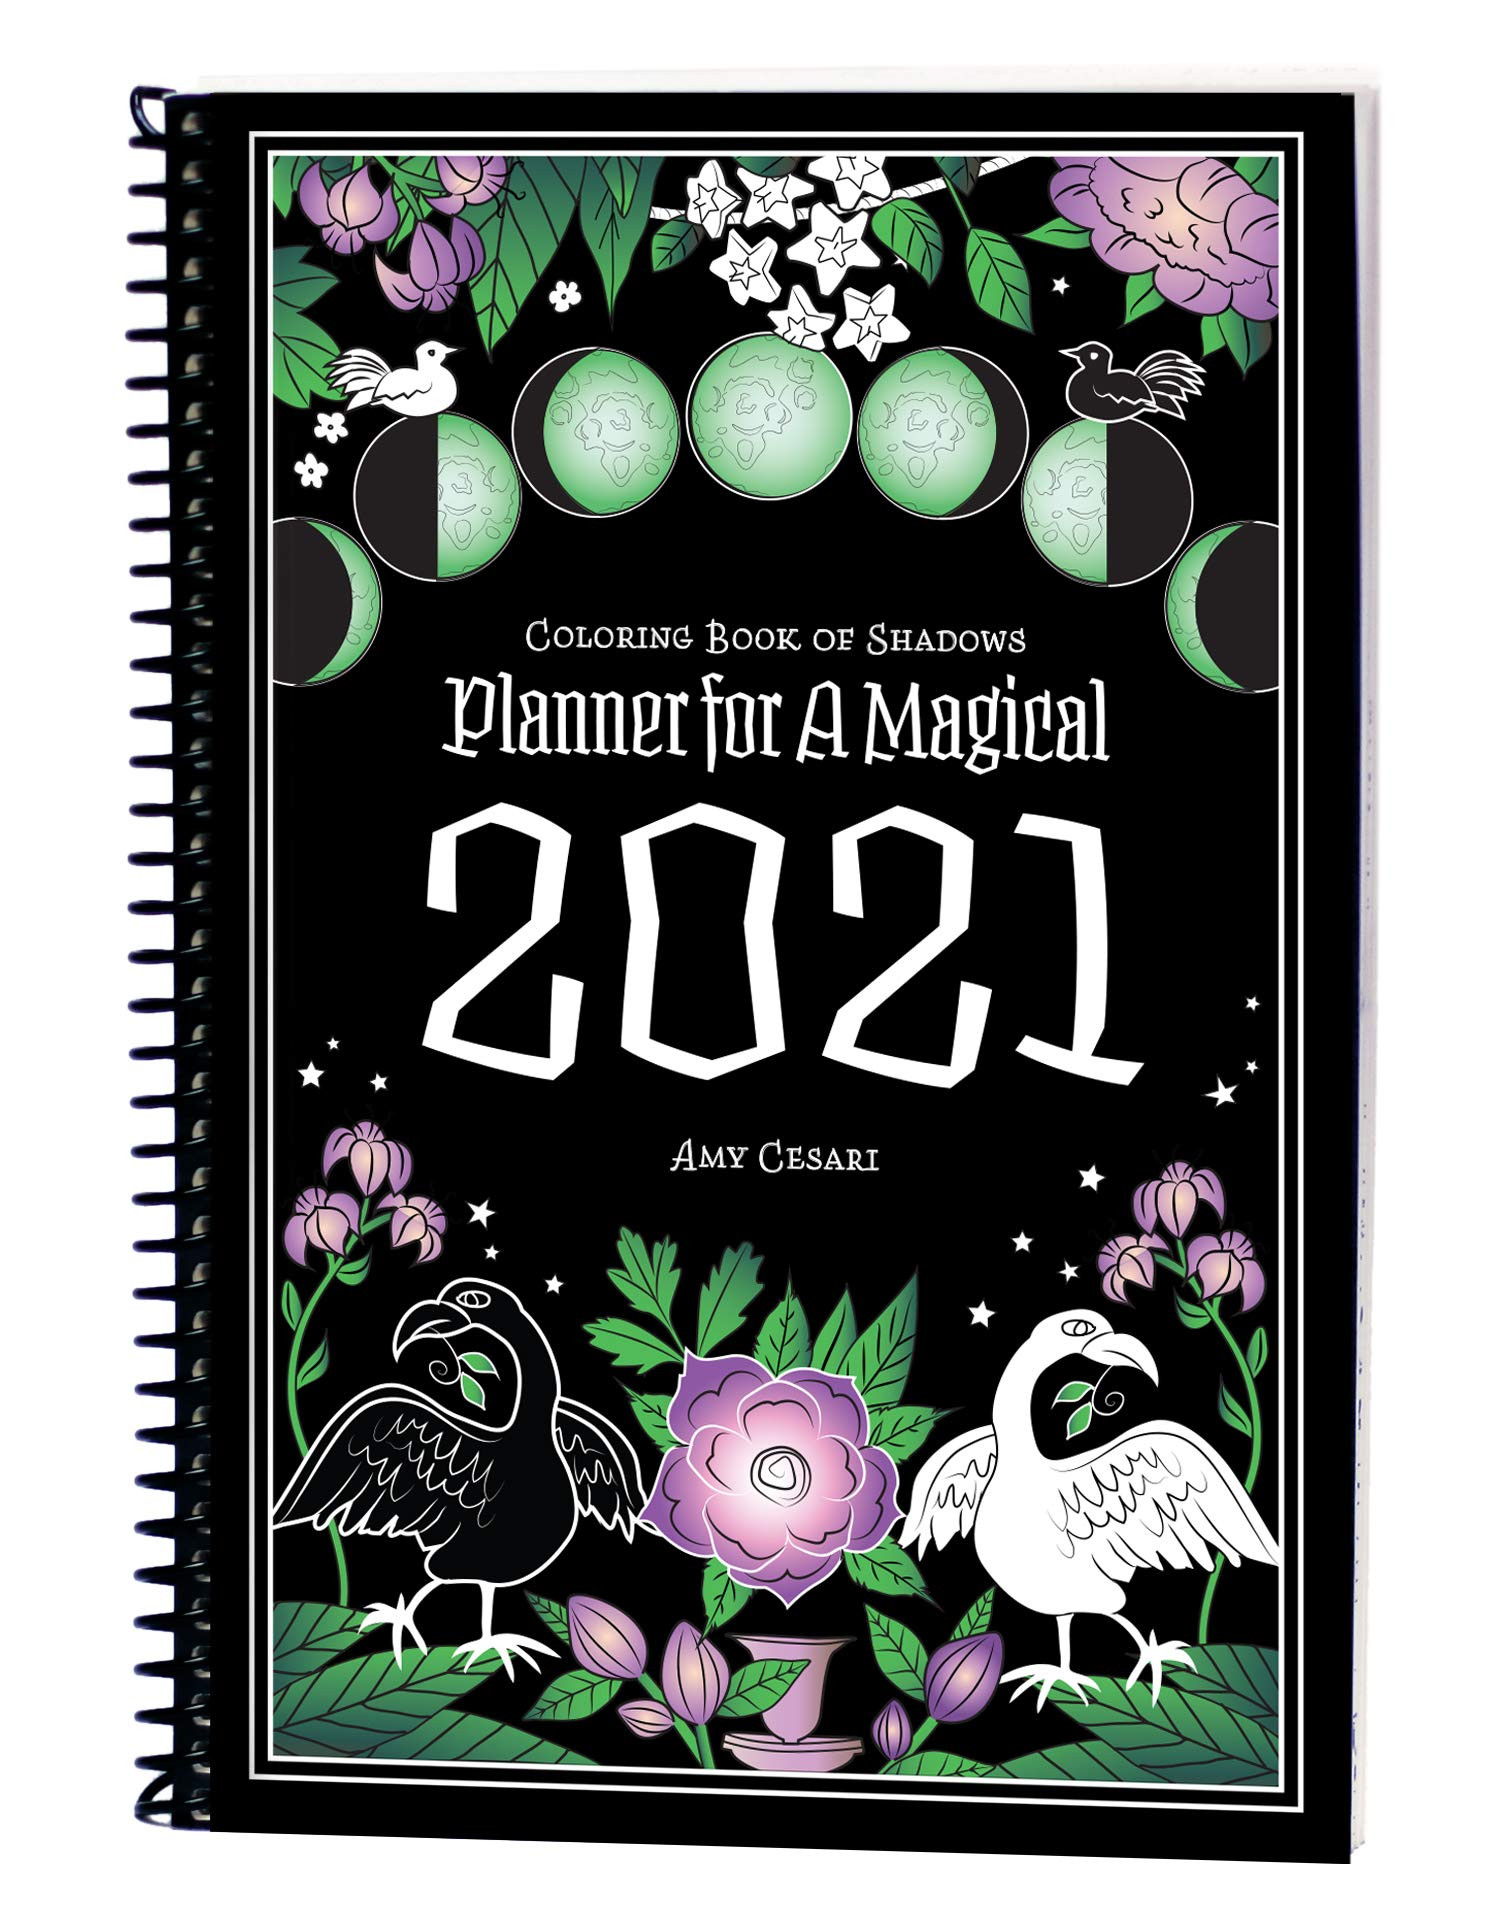 Coloring Book of Shadows: Planner for a Magical 20